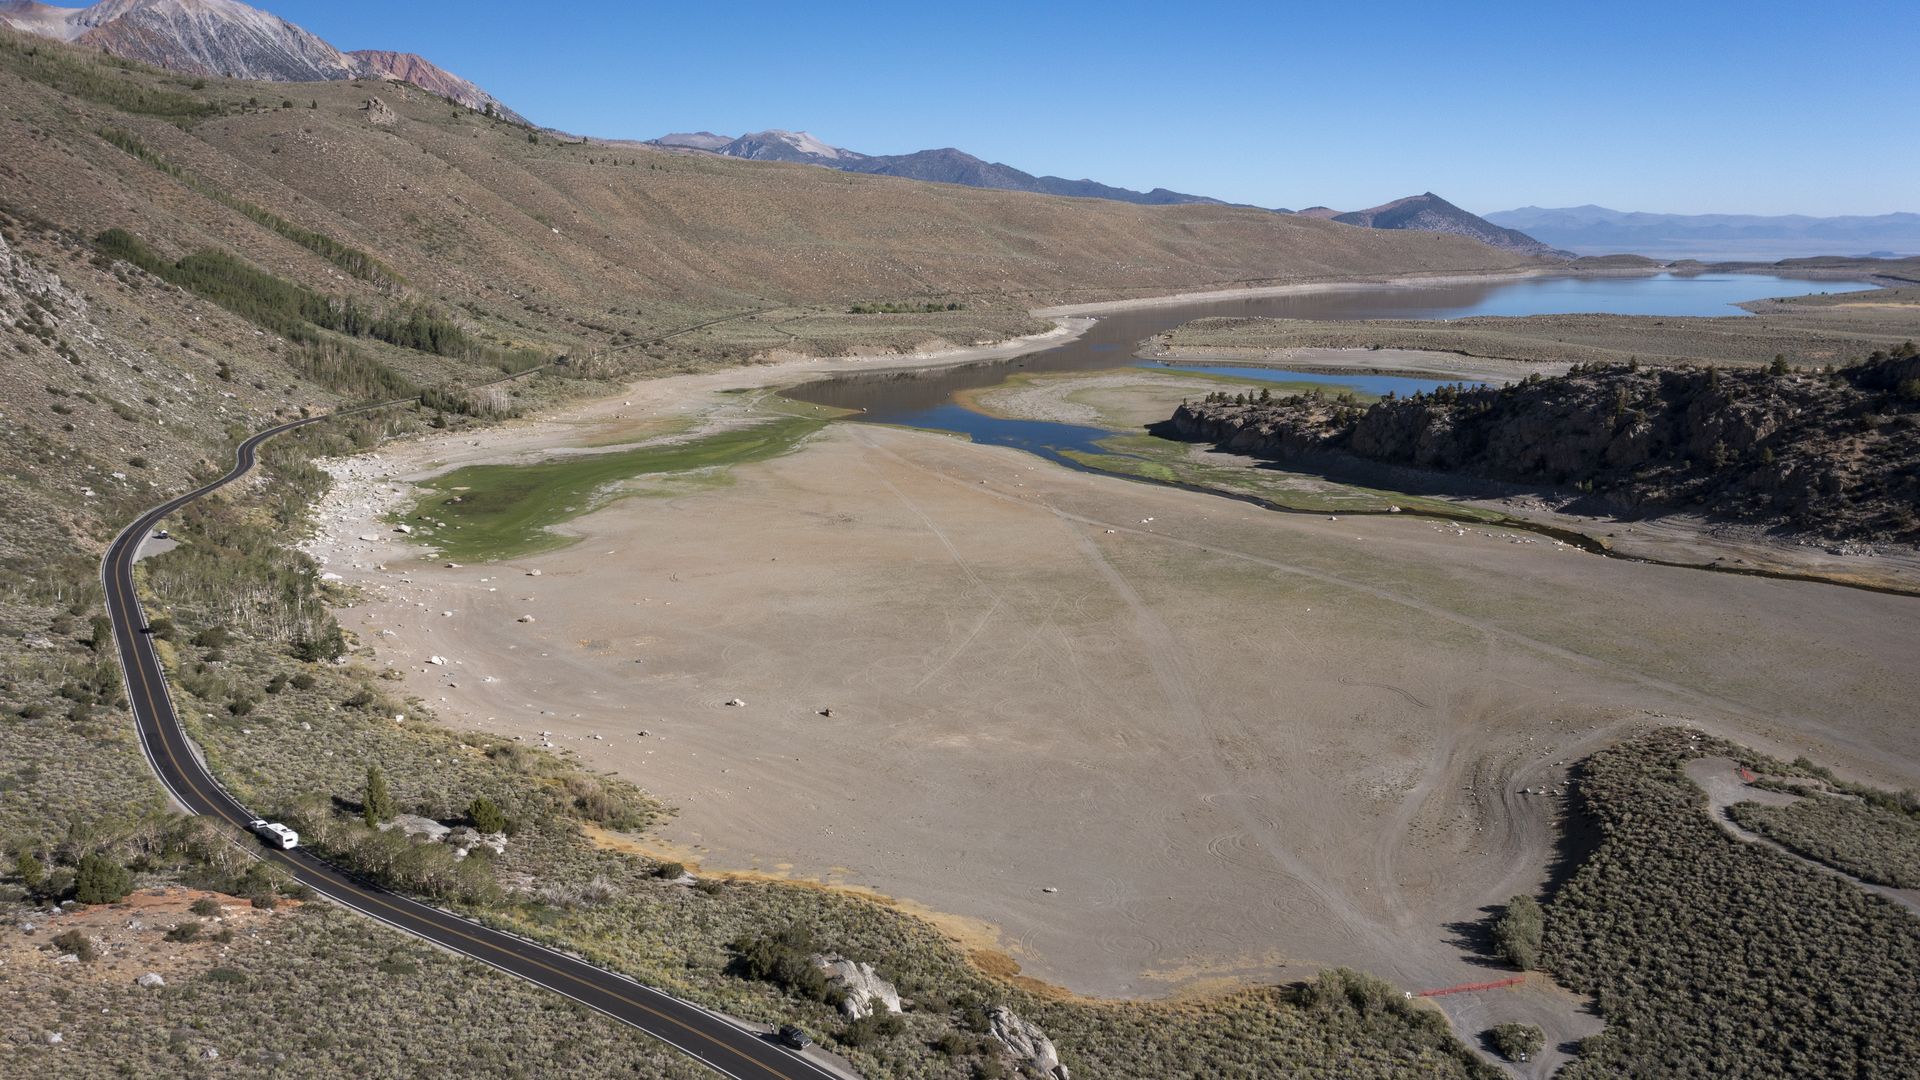 In an aerial view very low water level exposes an expanded shoreline at Grant Lake, which is fed by now-nearly snowless mountains in the Eastern Sierra Nevada, on August 11.